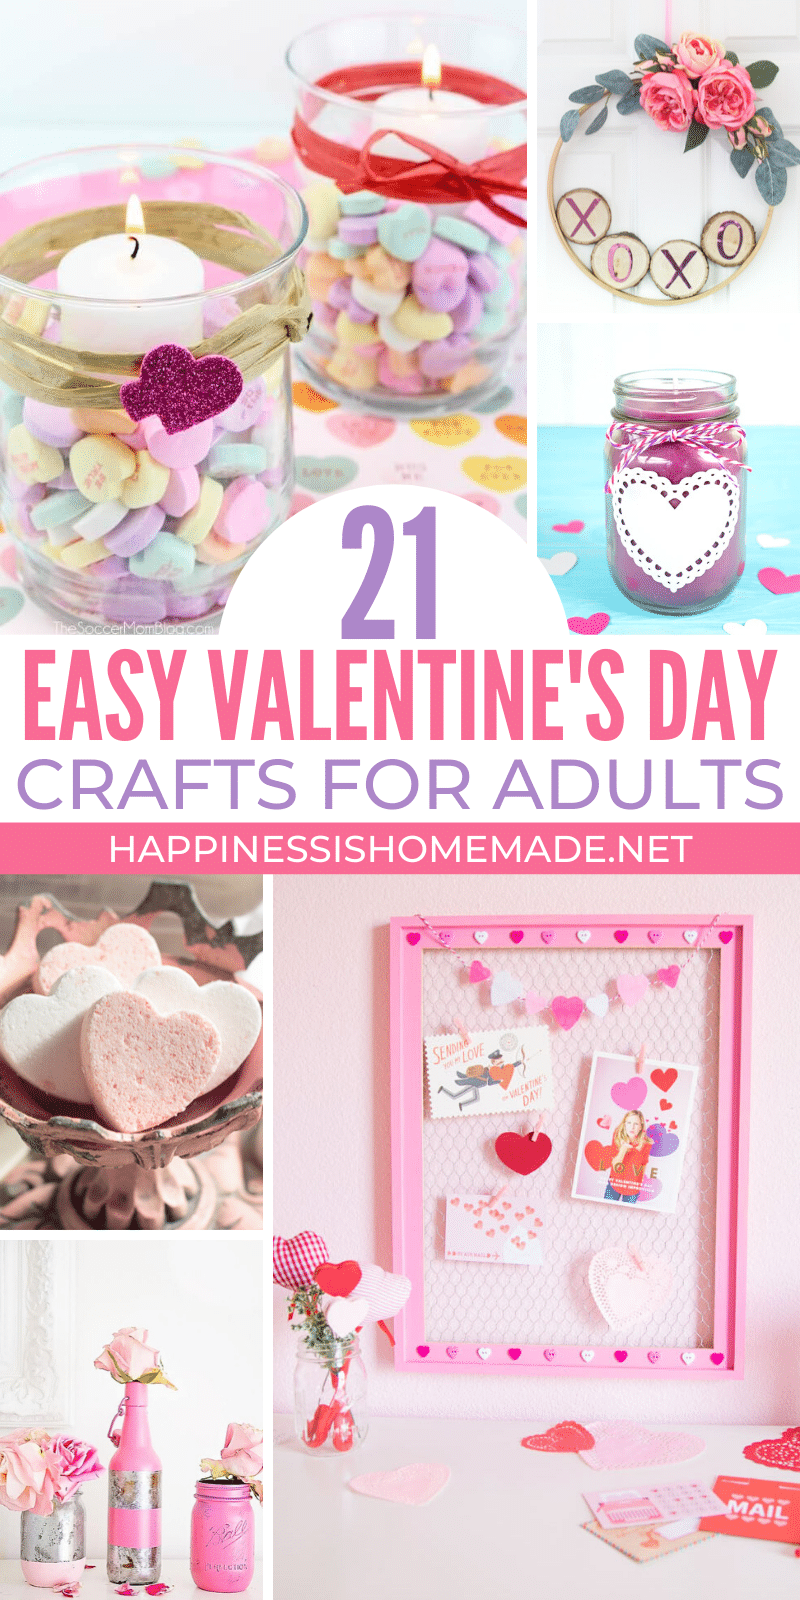 10 Easy Valentine's Day Crafts for Adults